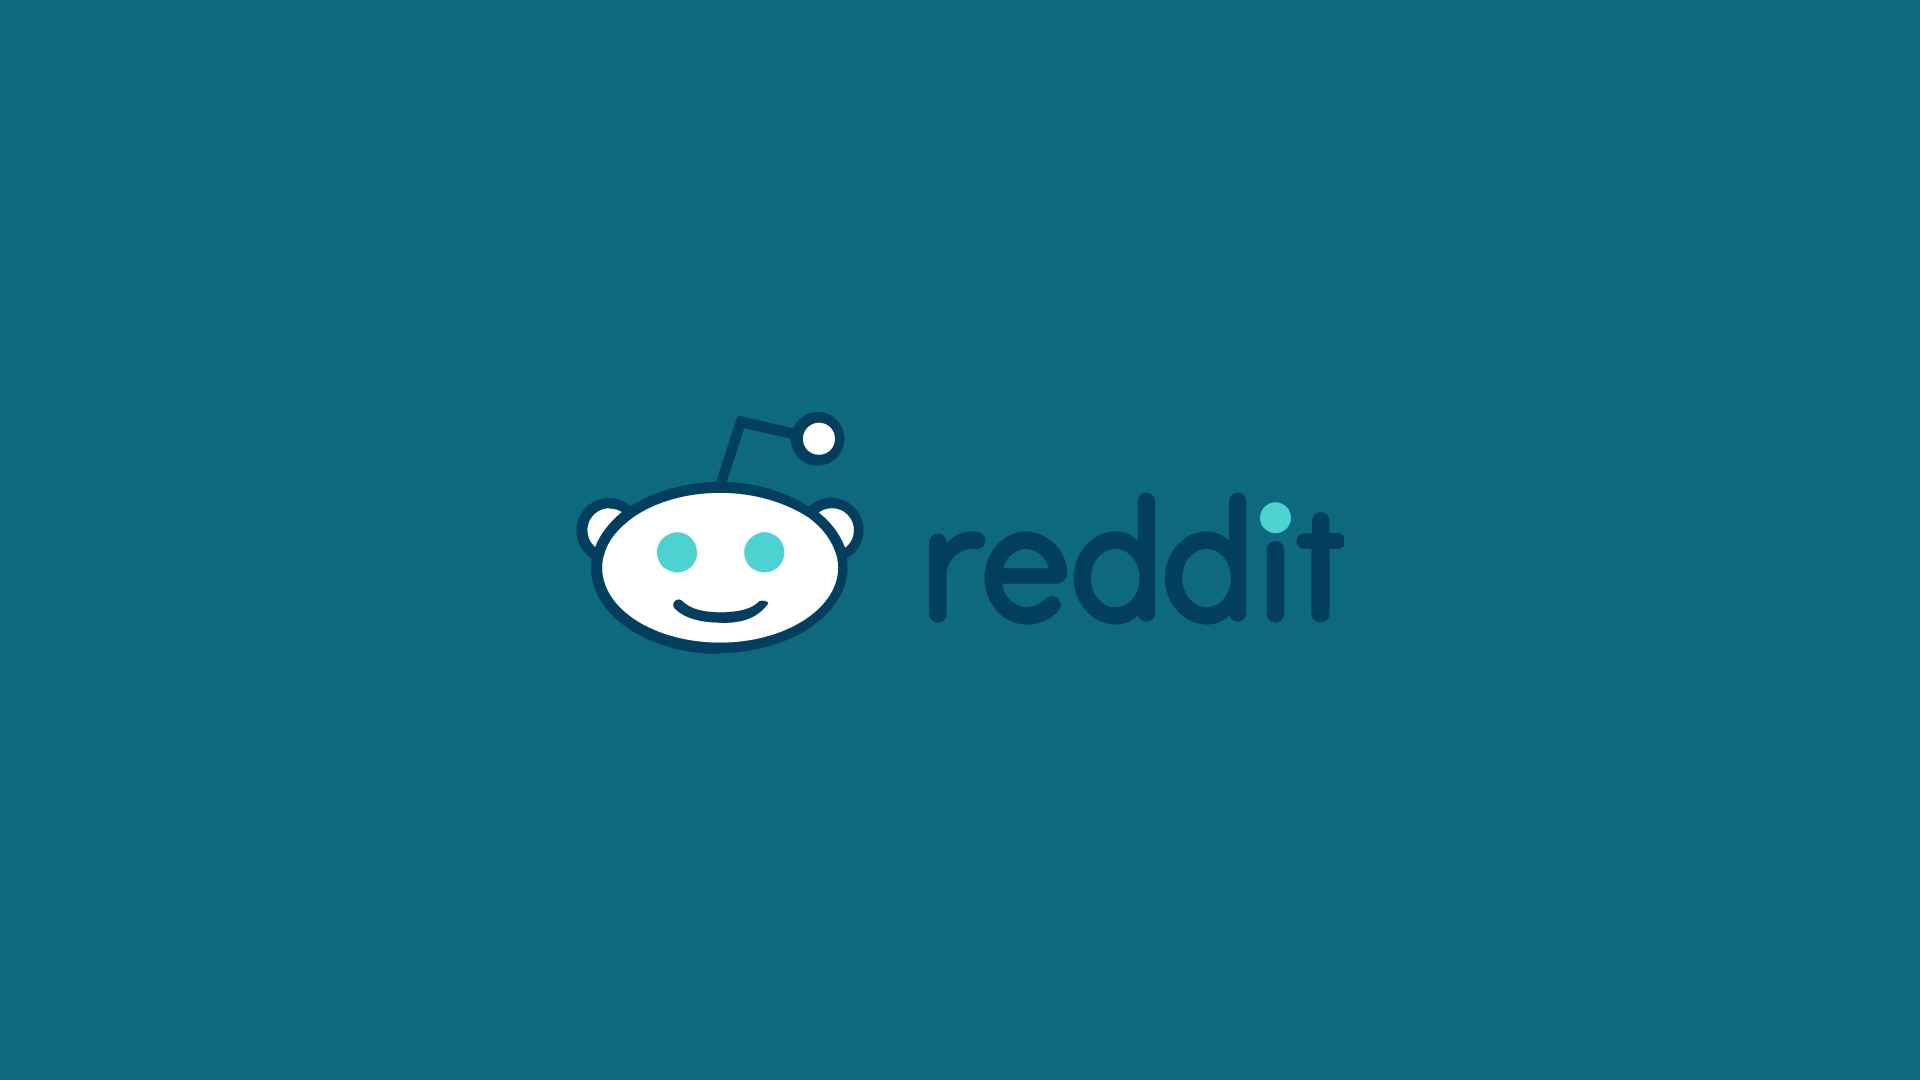 What is the Reddit front page and how does it differ from individual subreddits?